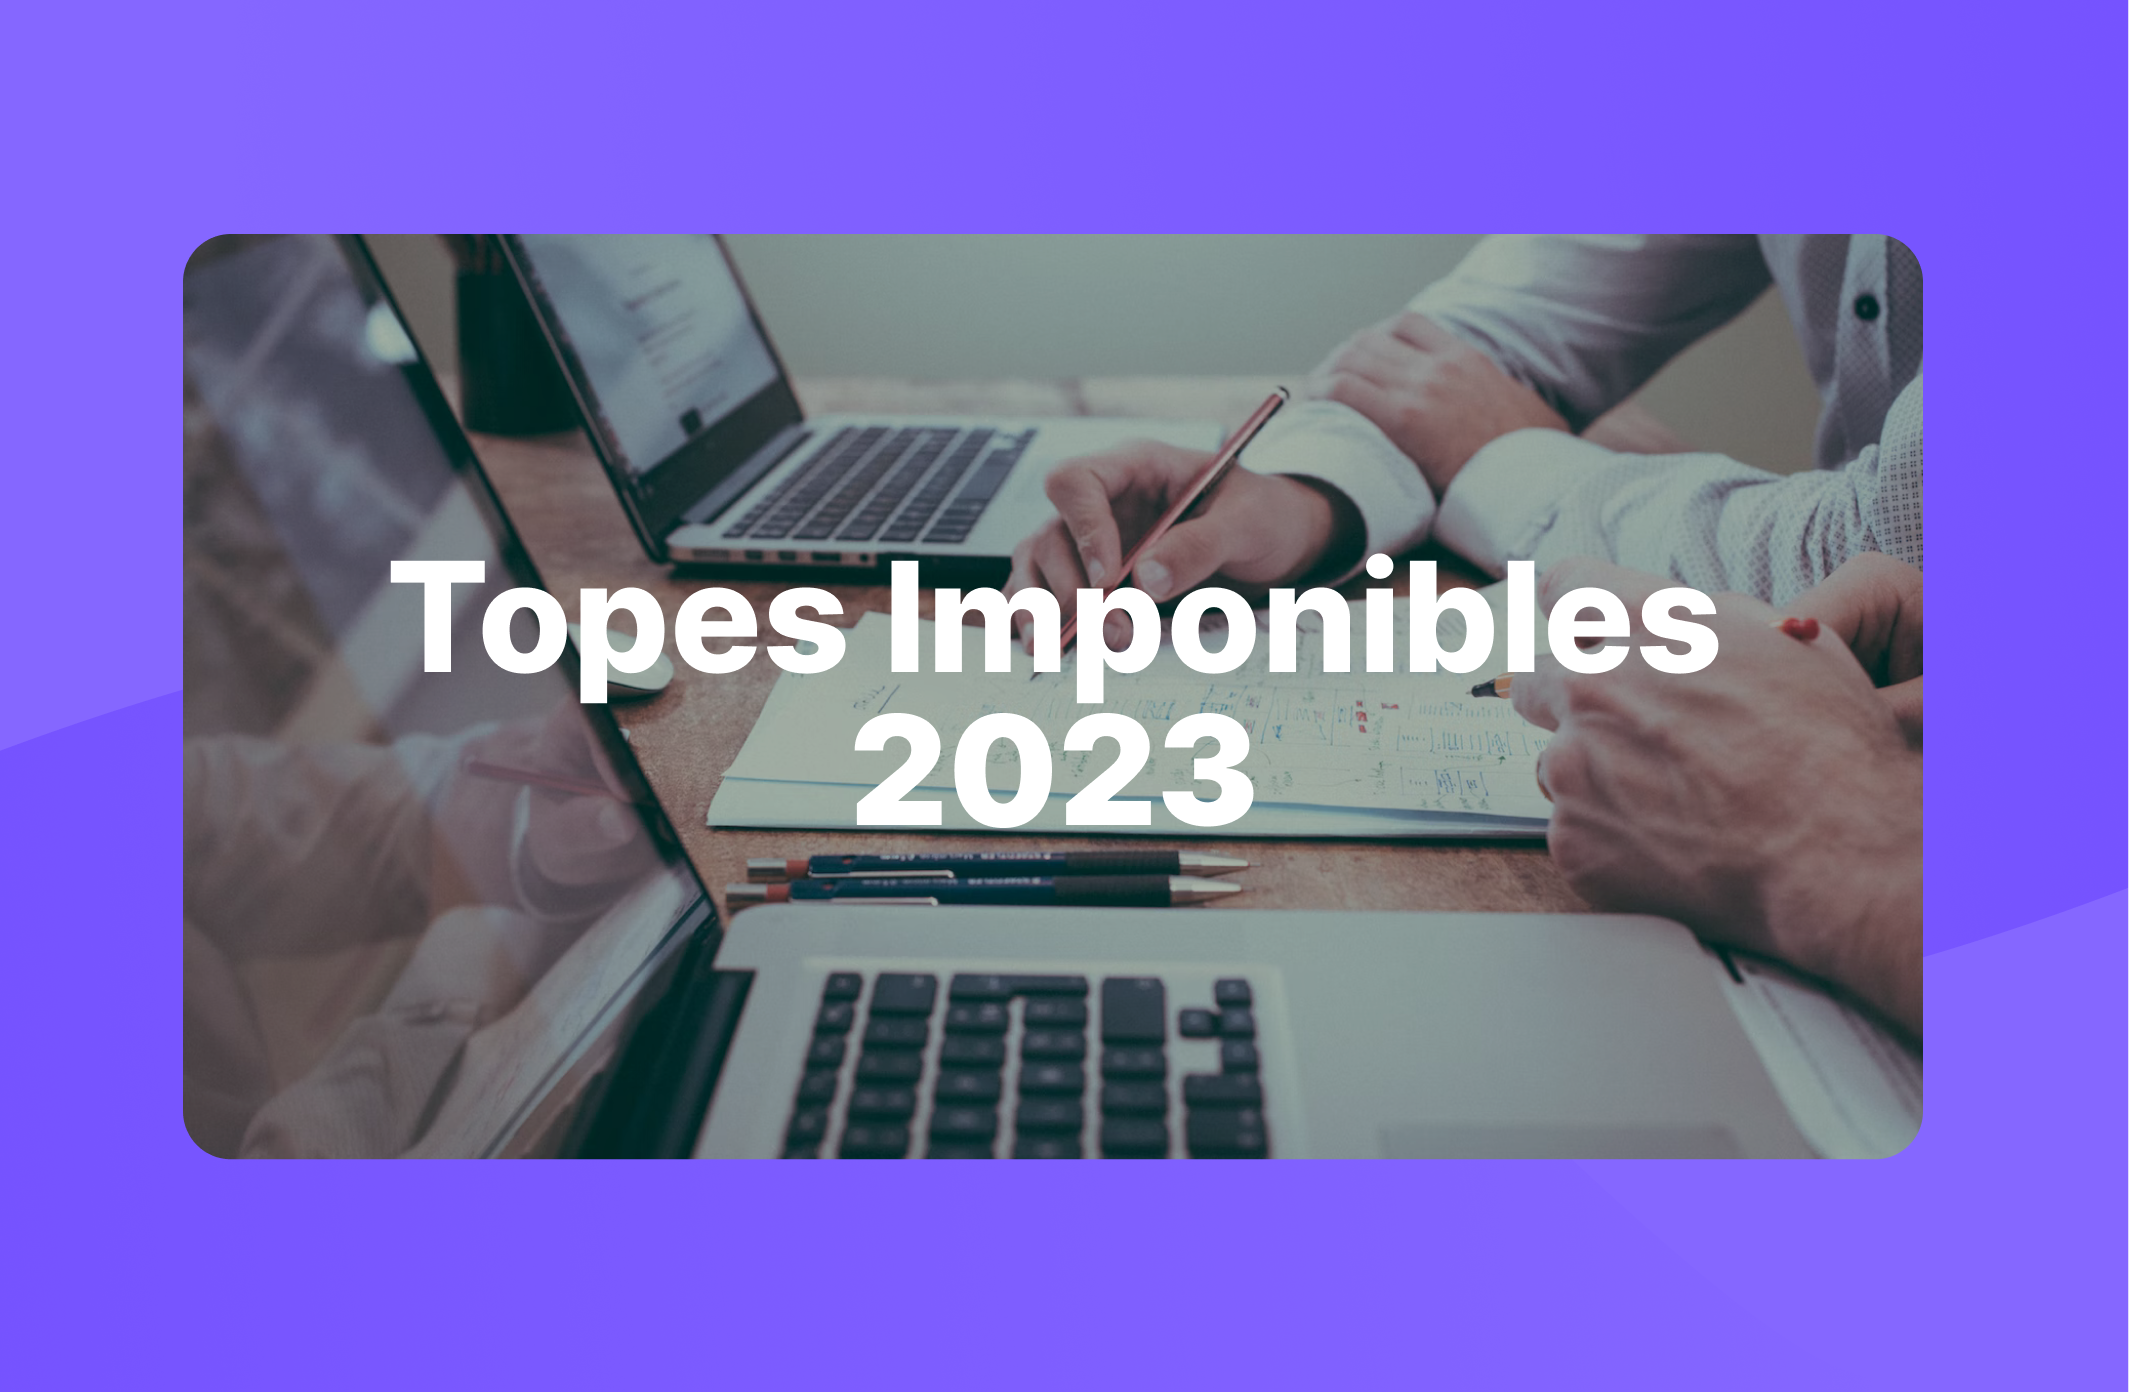 Topes imponibles 2023